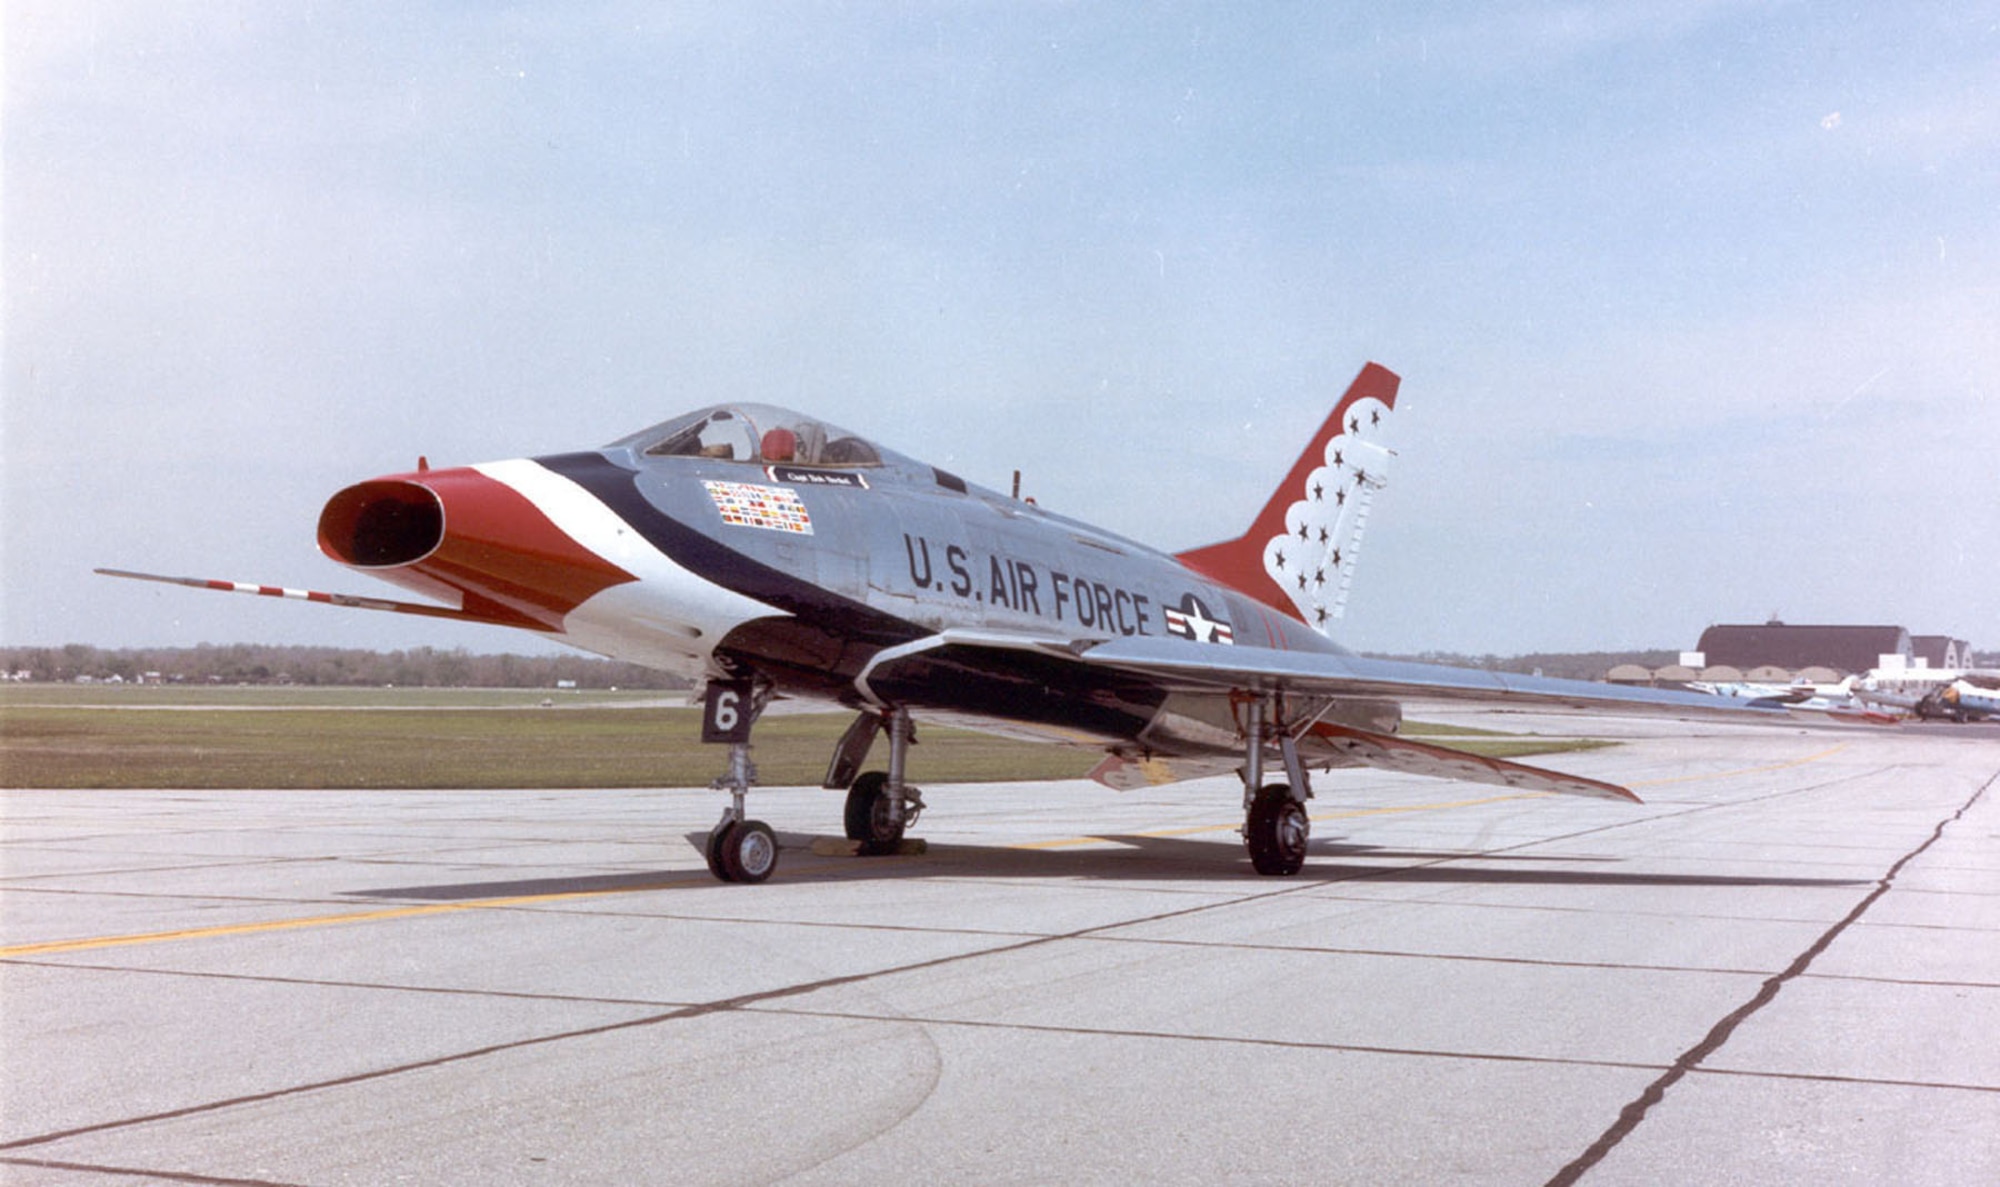 DAYTON, Ohio -- North American F-100D Super Sabre at the National Museum of the United States Air Force. (U.S. Air Force photo)